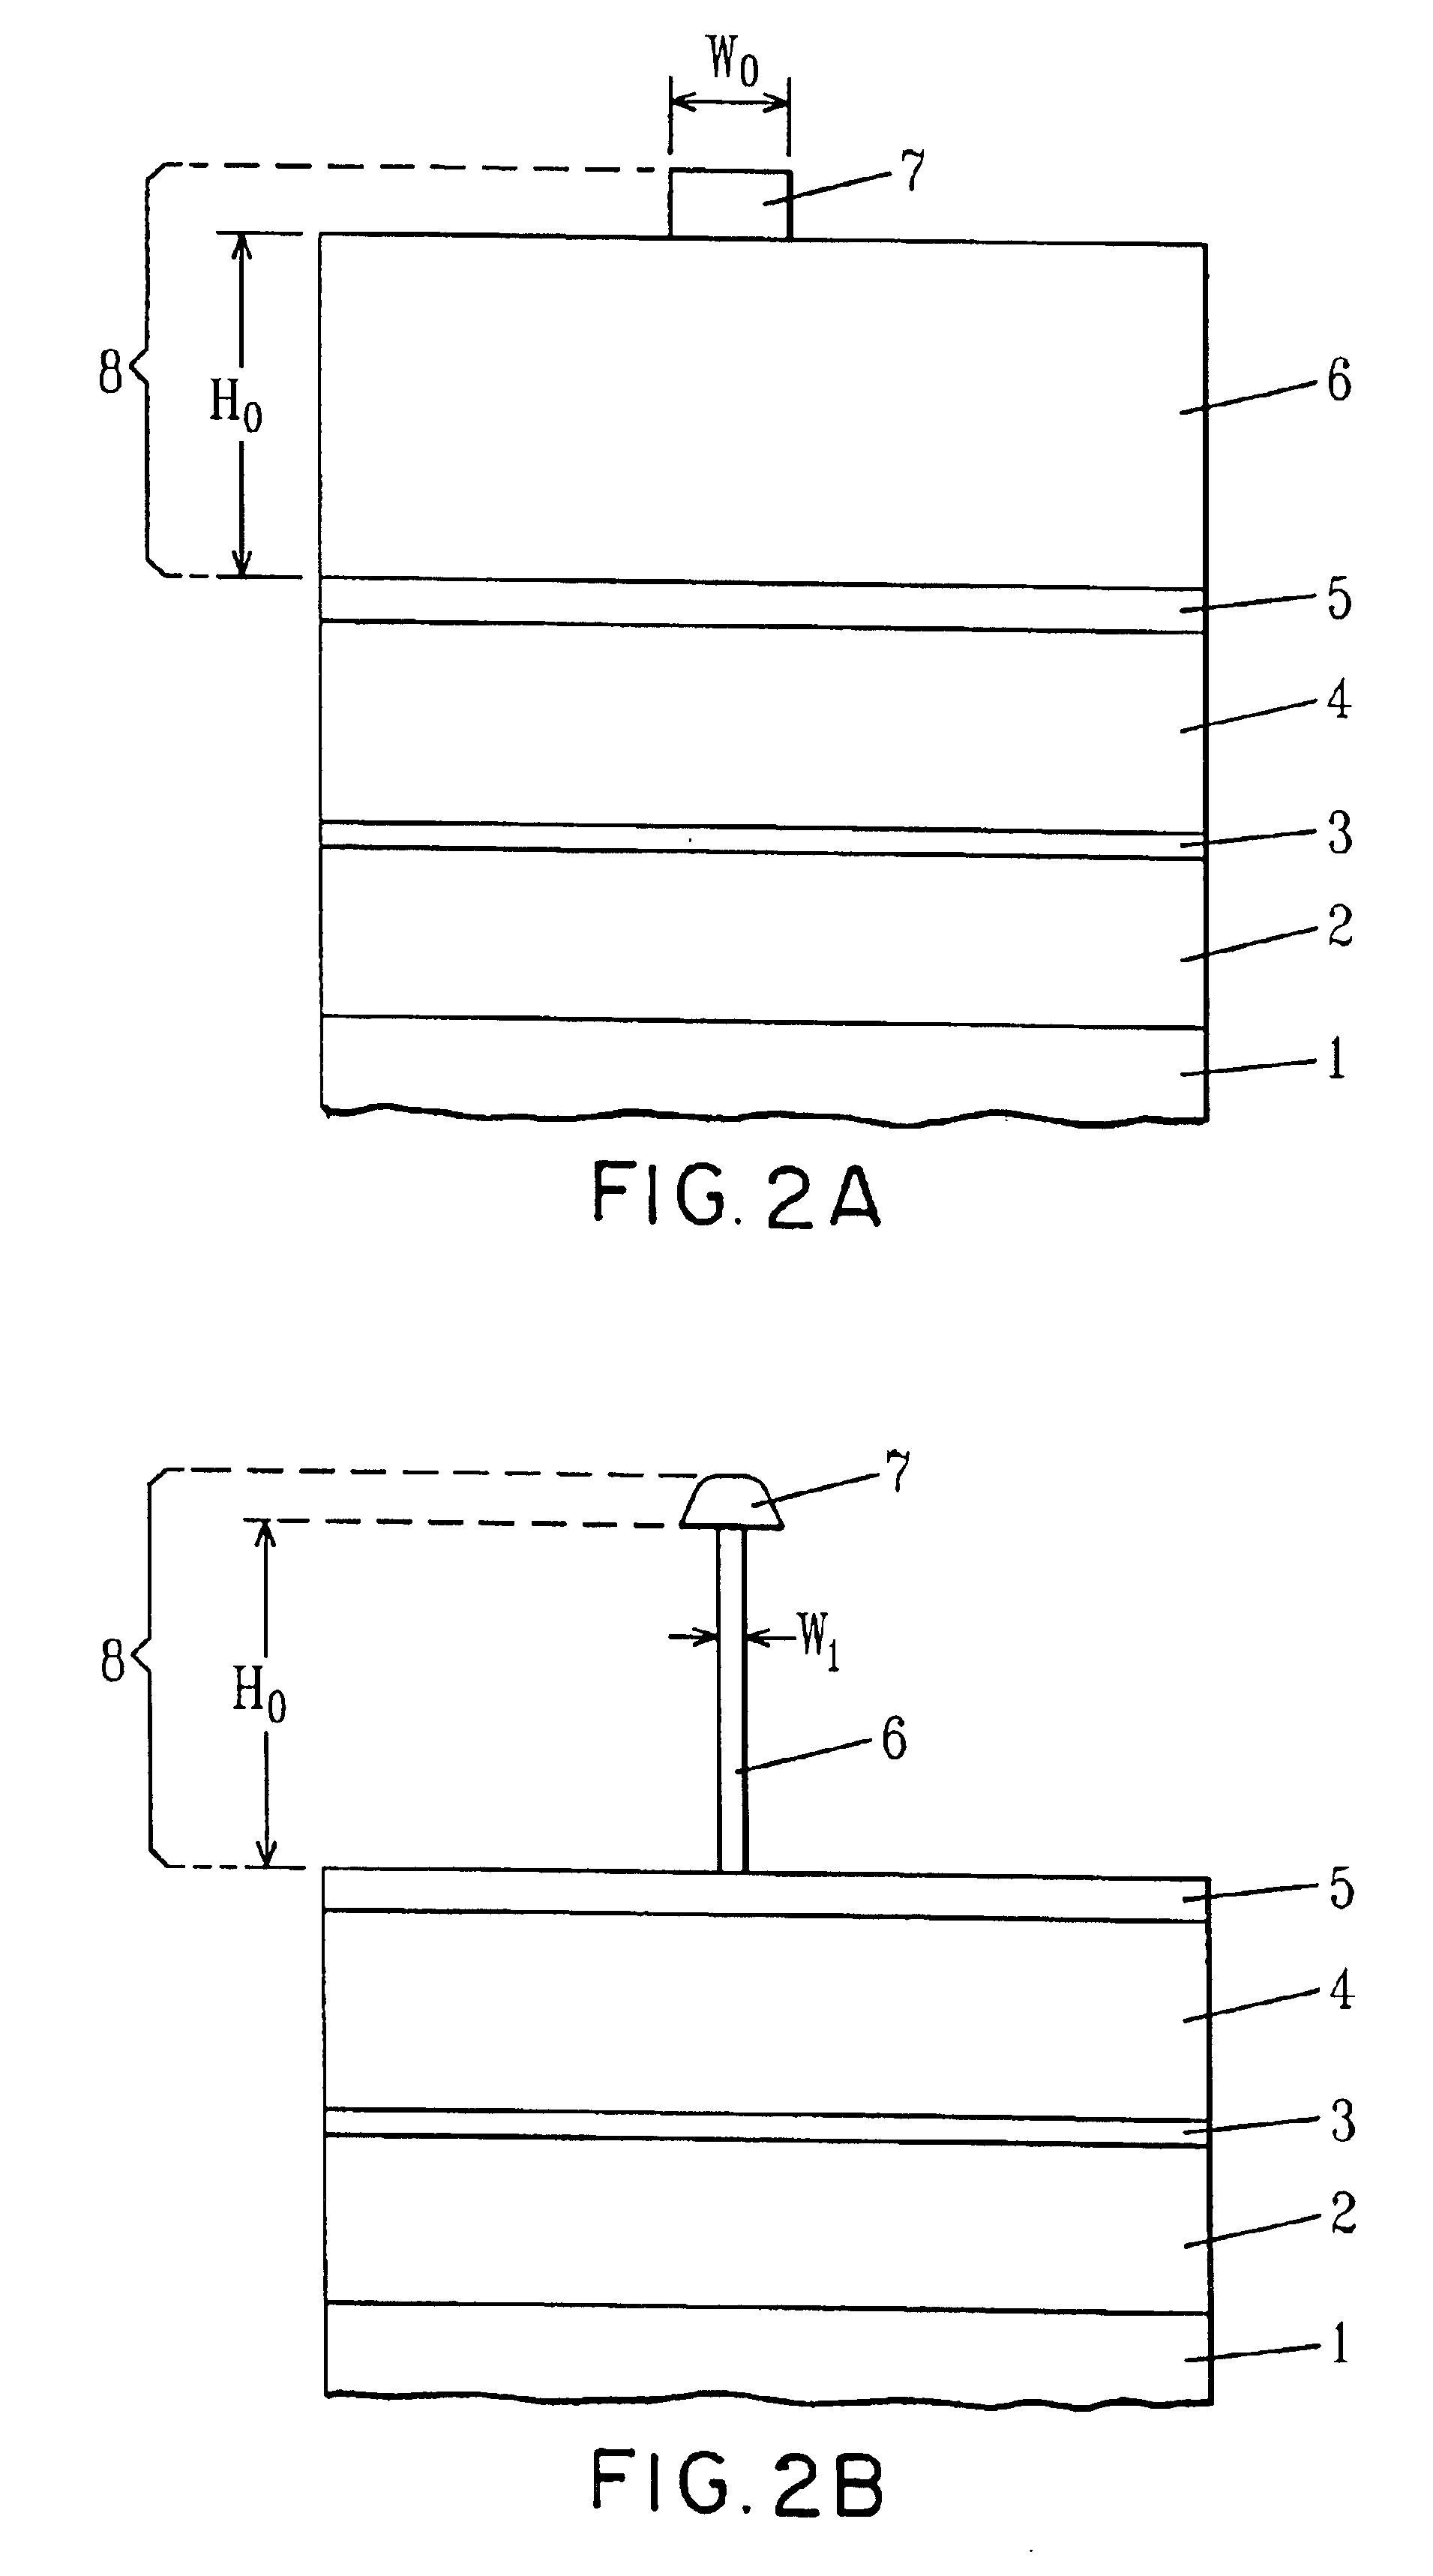 Lateral-only photoresist trimming for sub-80 nm gate stack